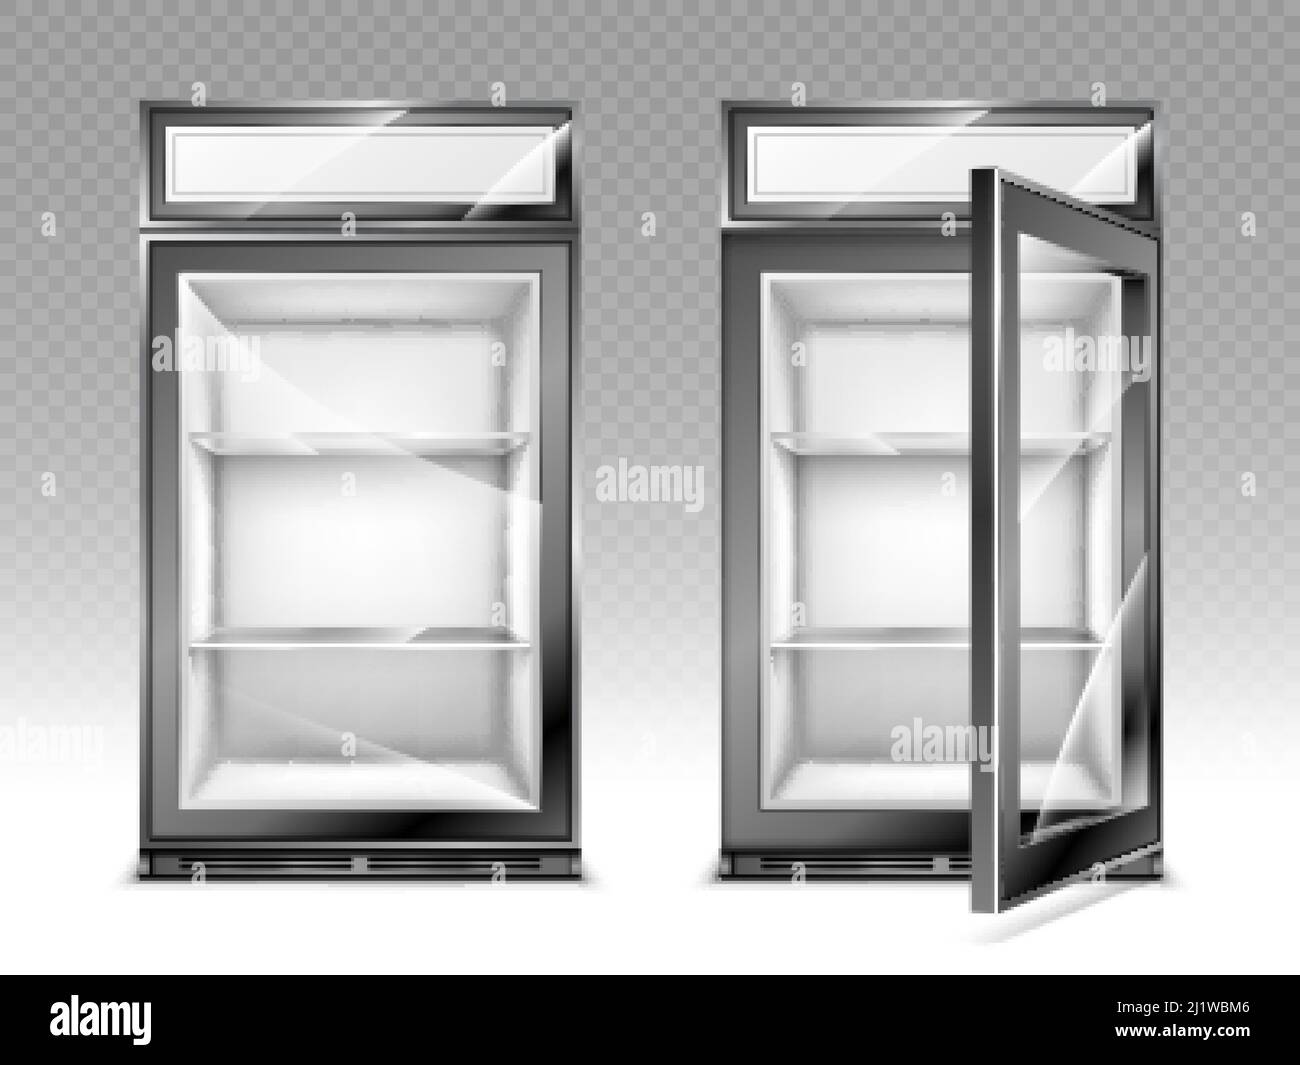 Mini refrigerator for beverages with advertising digital display and transparent close and open glass door. Empty fridge for food or drinks in store. Stock Vector